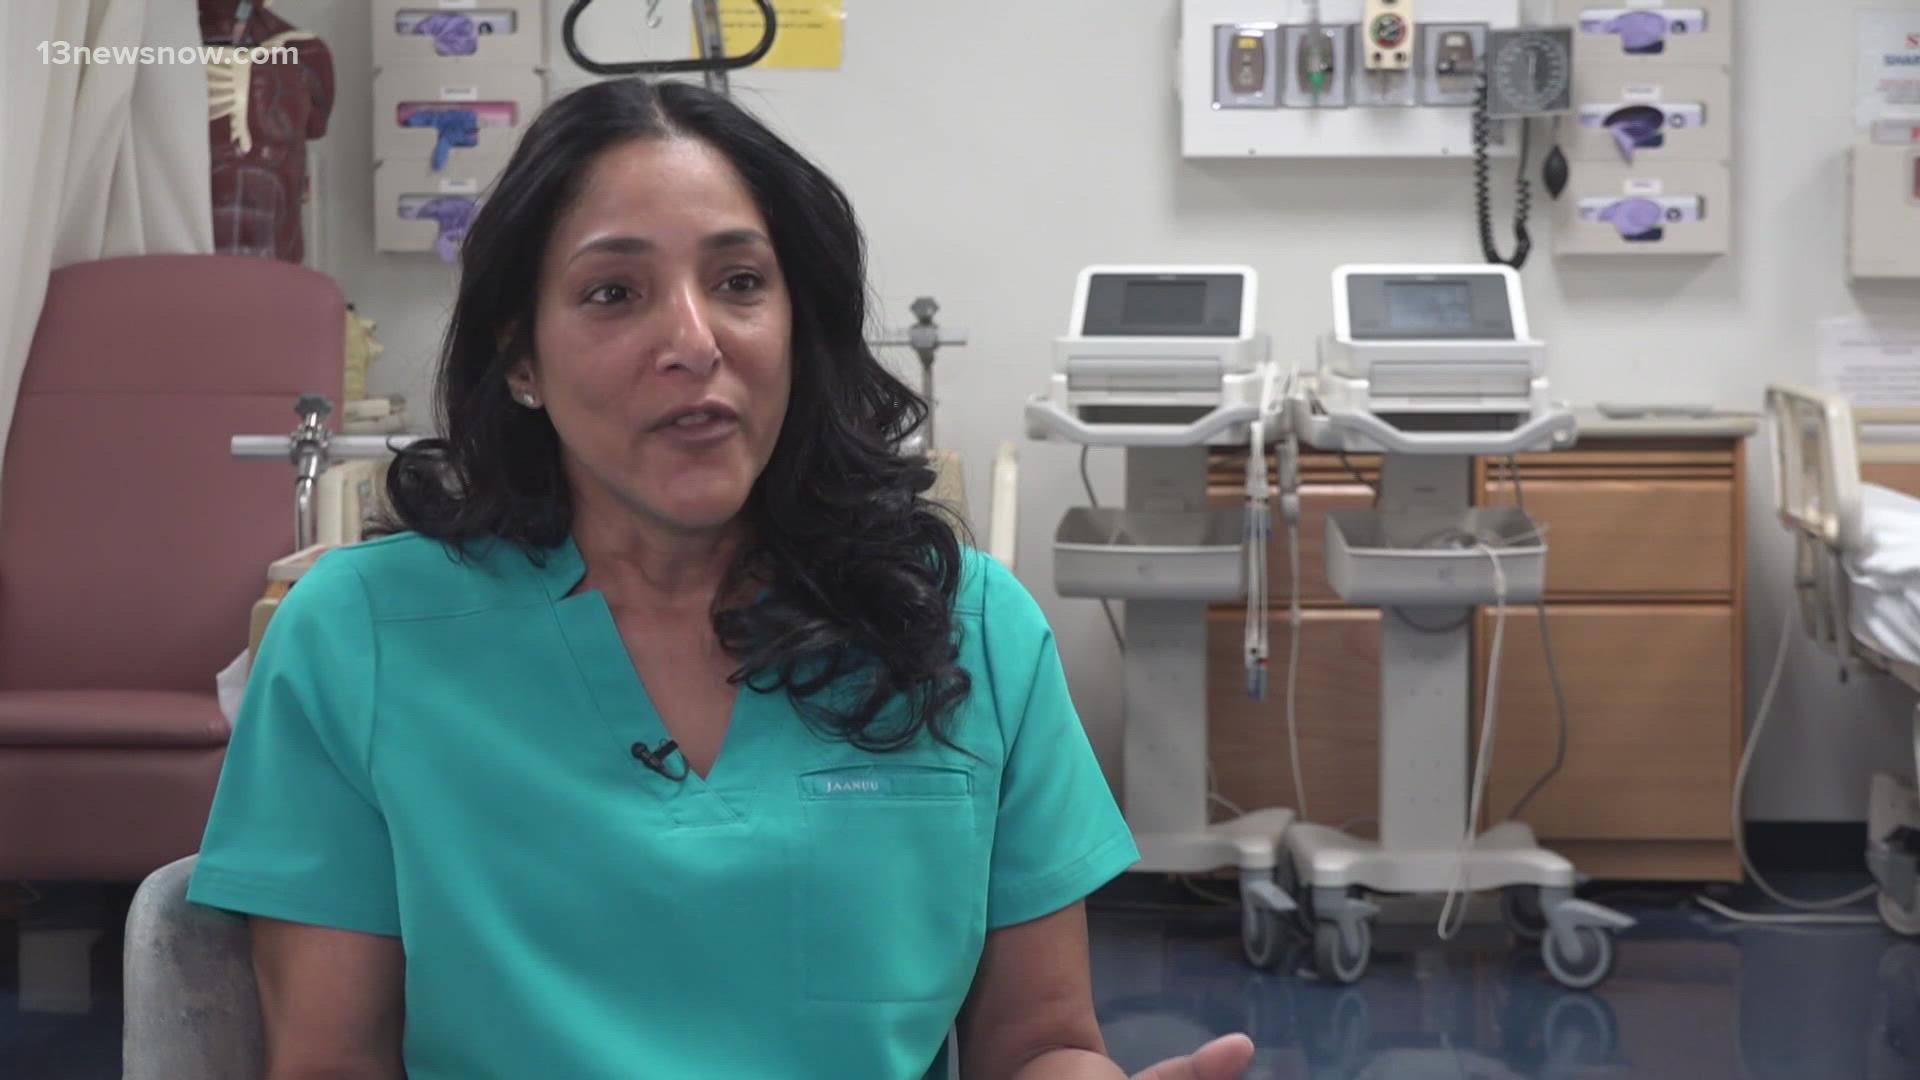 A transplant to Hampton Roads, 58-year-old Angie Joaquin of Chesapeake moved from New York with the goal of going to nursing school.